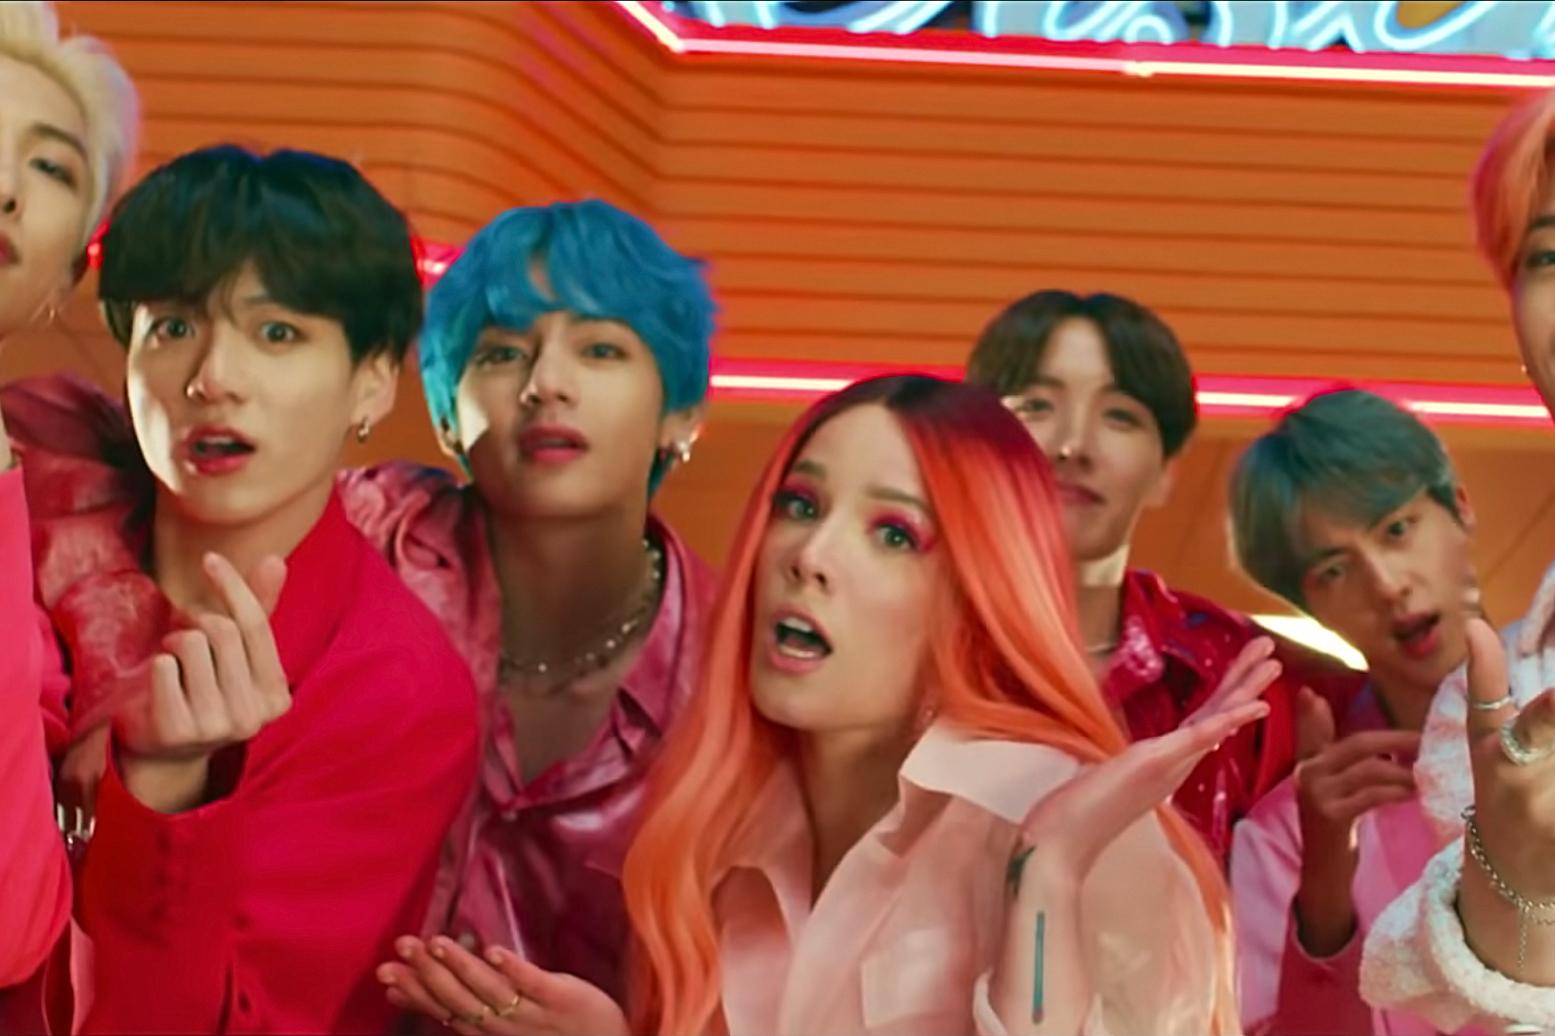 Watch BTS Party With Halsey in “Boy With Luv” Video